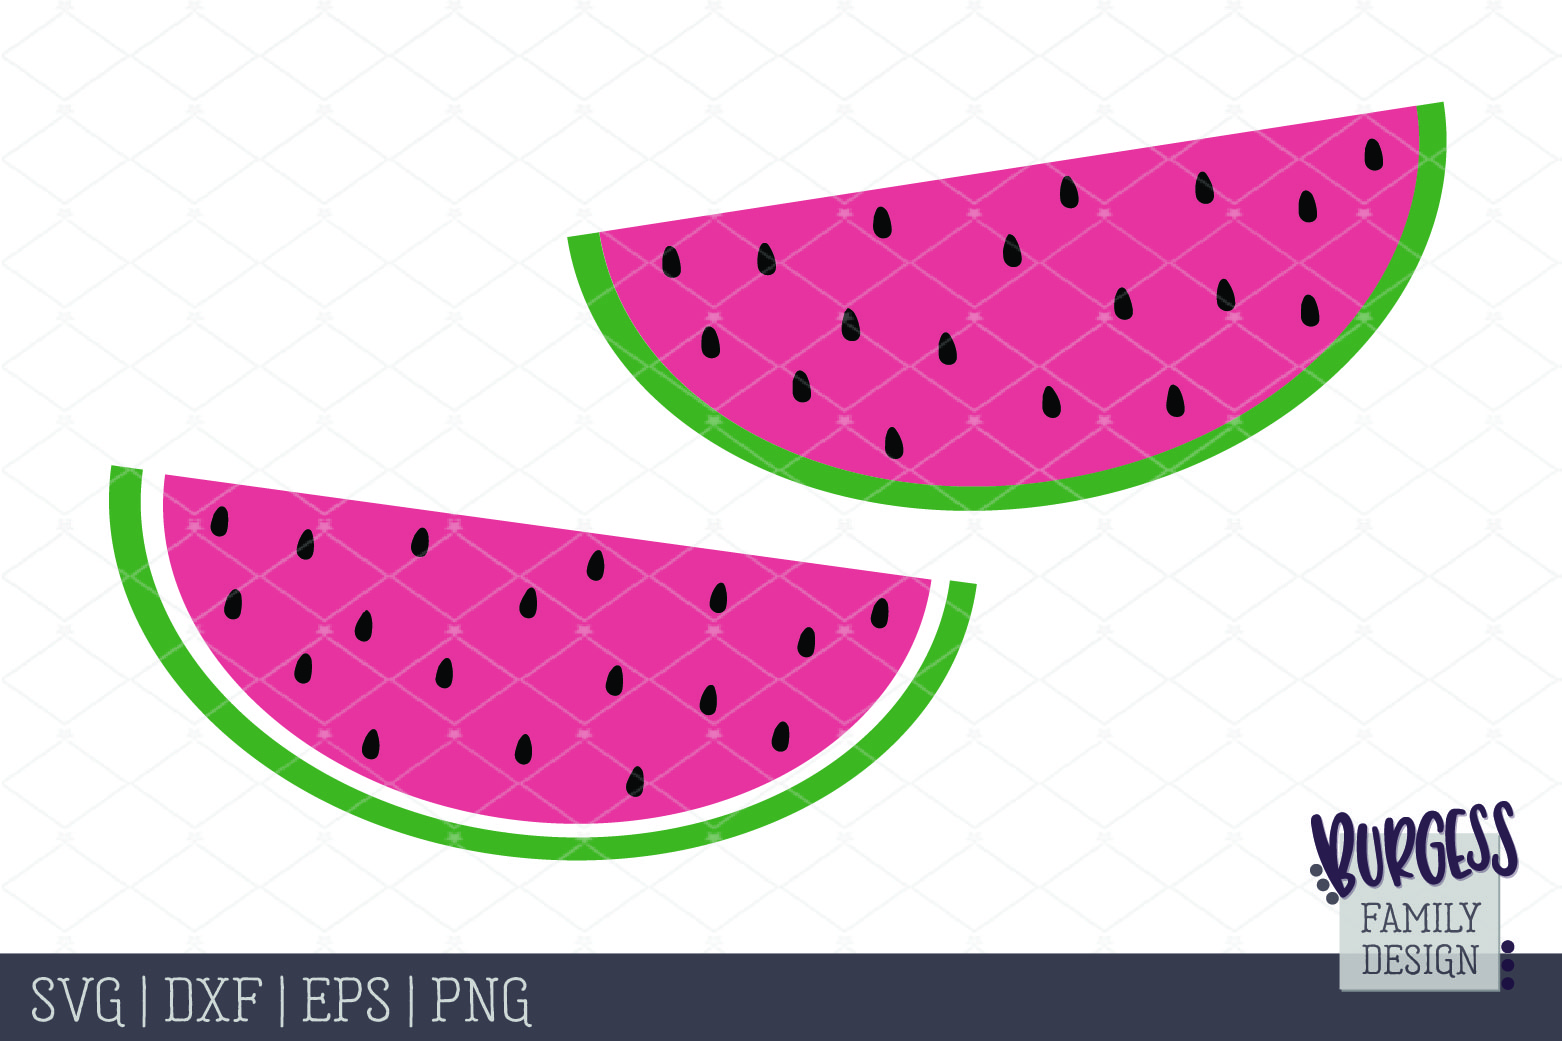 Download Watermelons - Clipart | SVG DXF EPS PNG (70108) | SVGs ...